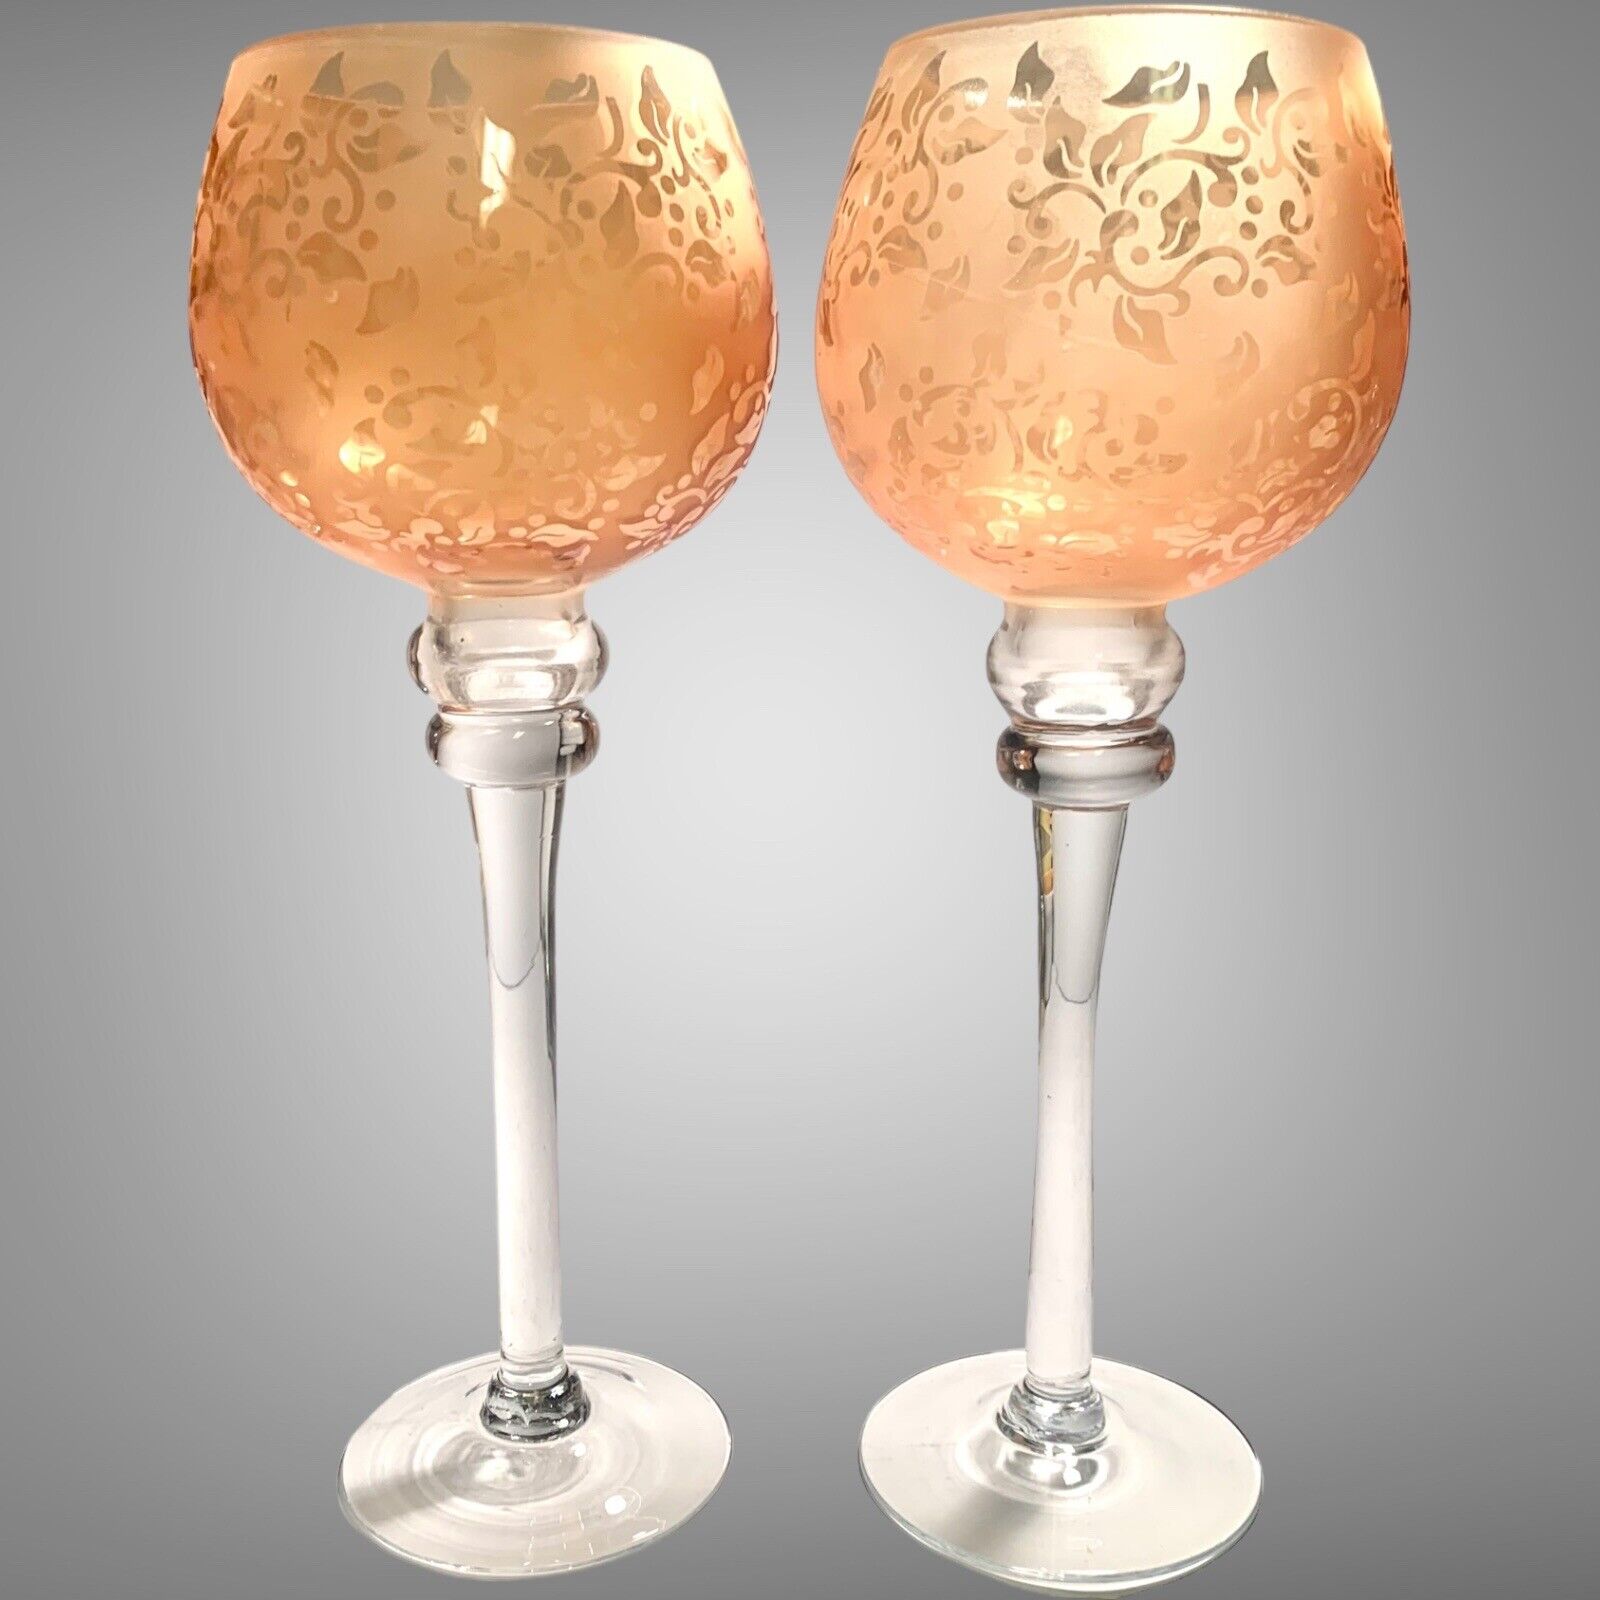 Pair Of Stemmed 13” Tall Tealight/Votive Candle Holders Tan/Rosé With Clear Stem